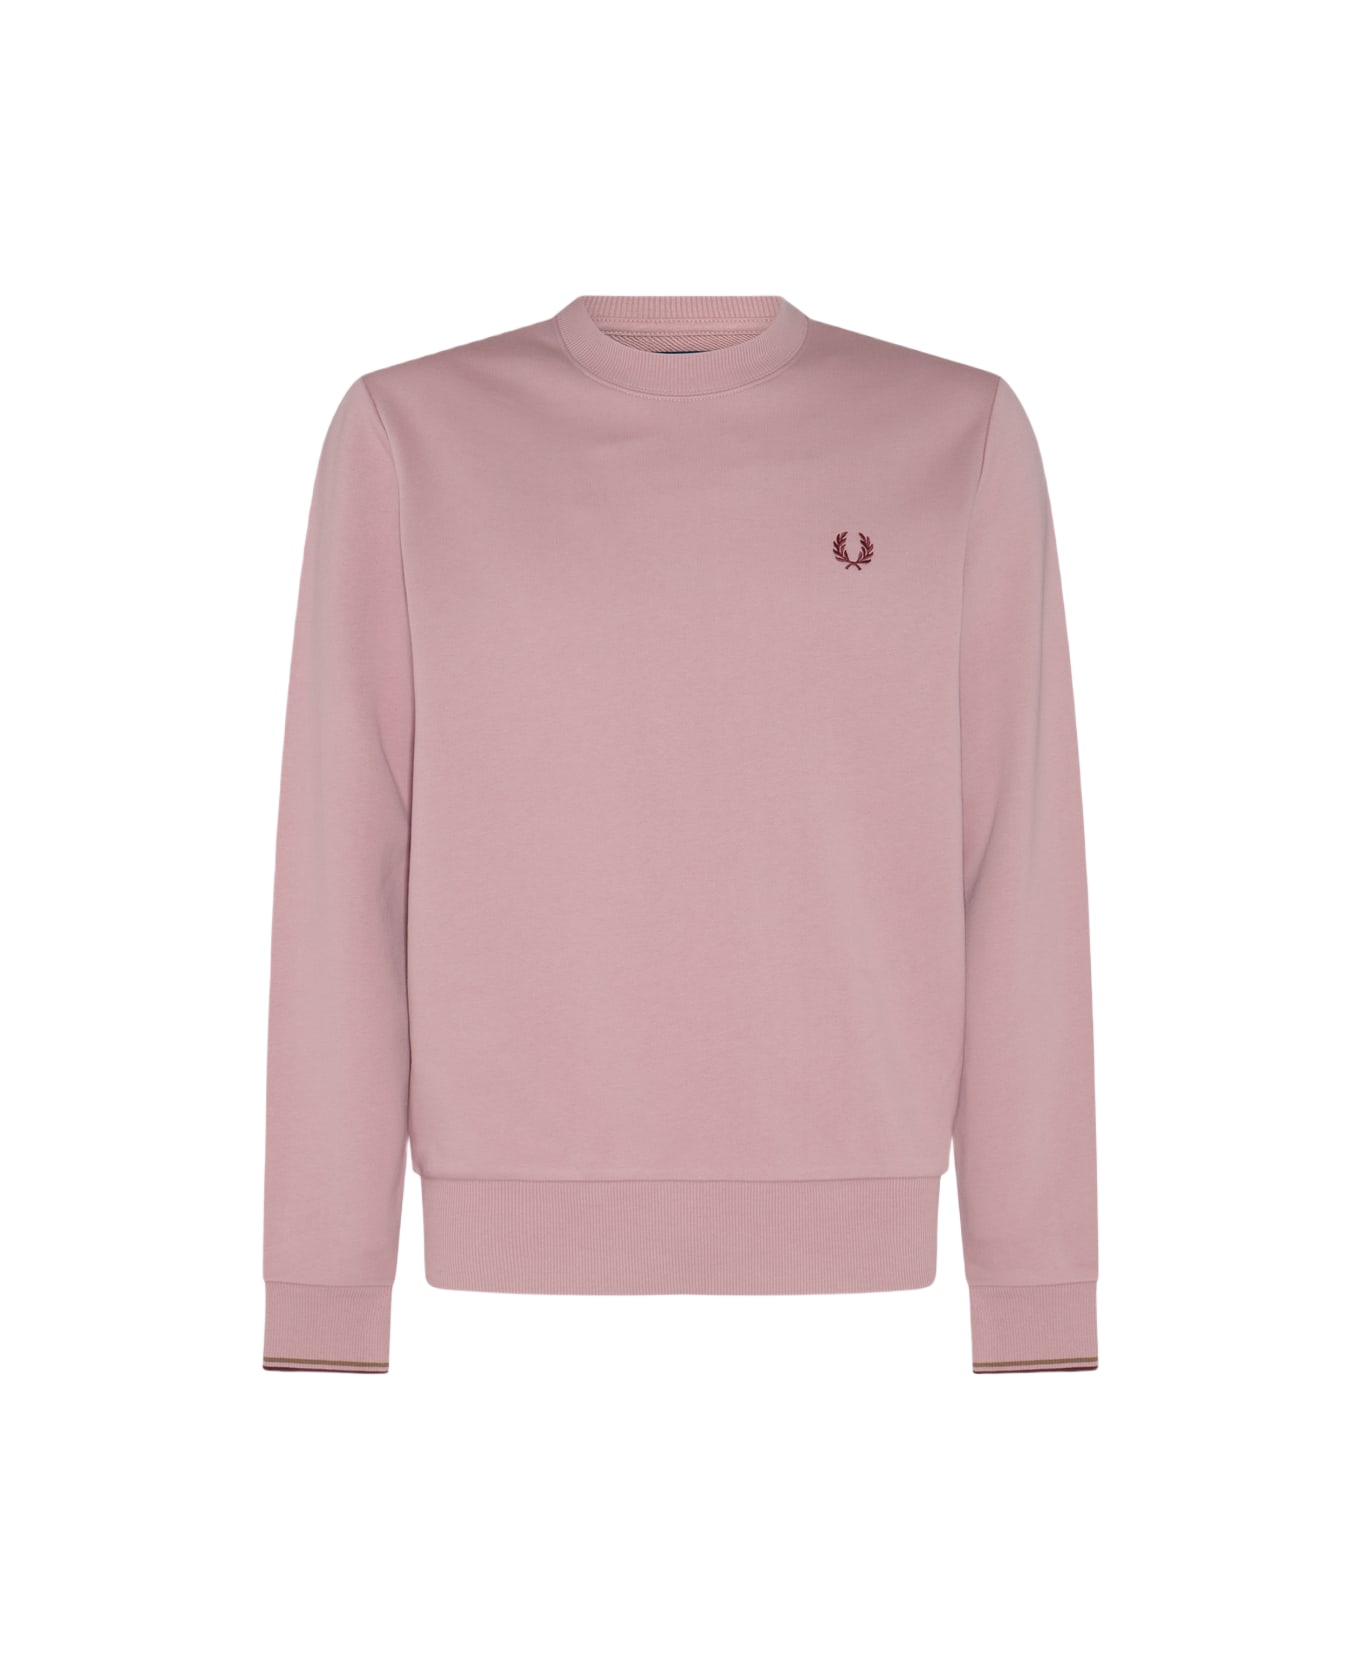 Fred Perry Dusty Pink Cotton Blend Sweatshirt - DUSTy pink